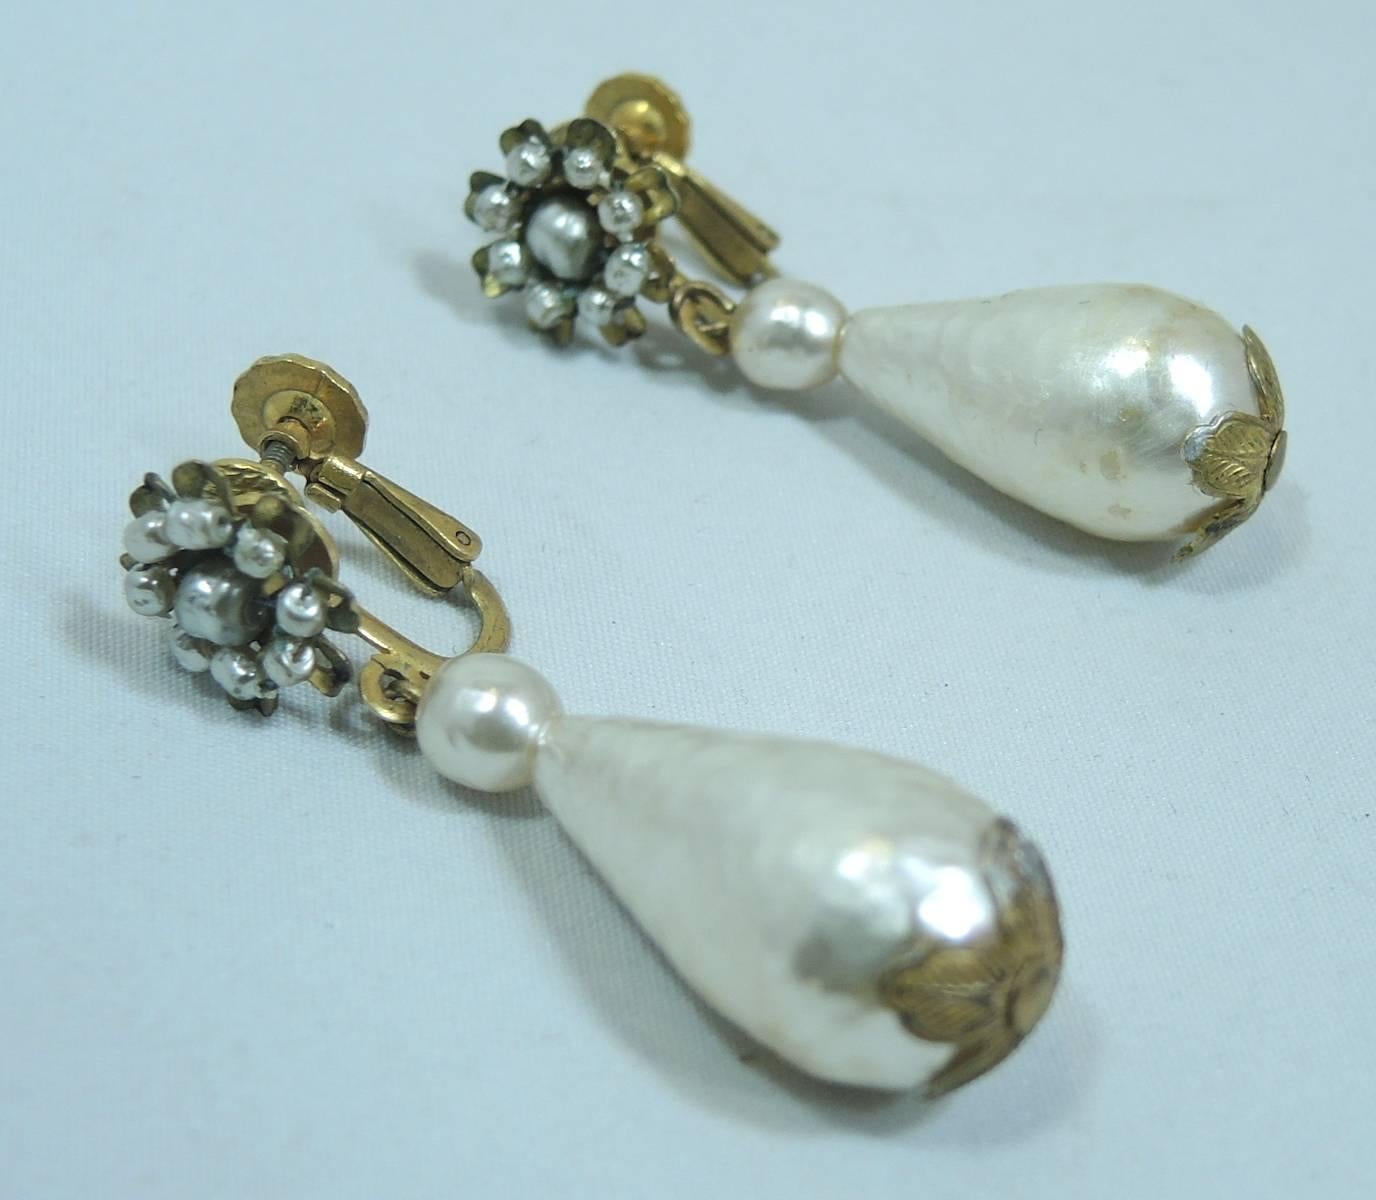 We are always looking for the long pearl drop earrings designed by Miriam Haskell. They are always desirable and highly collectible. These earrings are made in a gold tone setting and measure almost 2” L x 1/2” w. They are signed “Miriam Haskell”